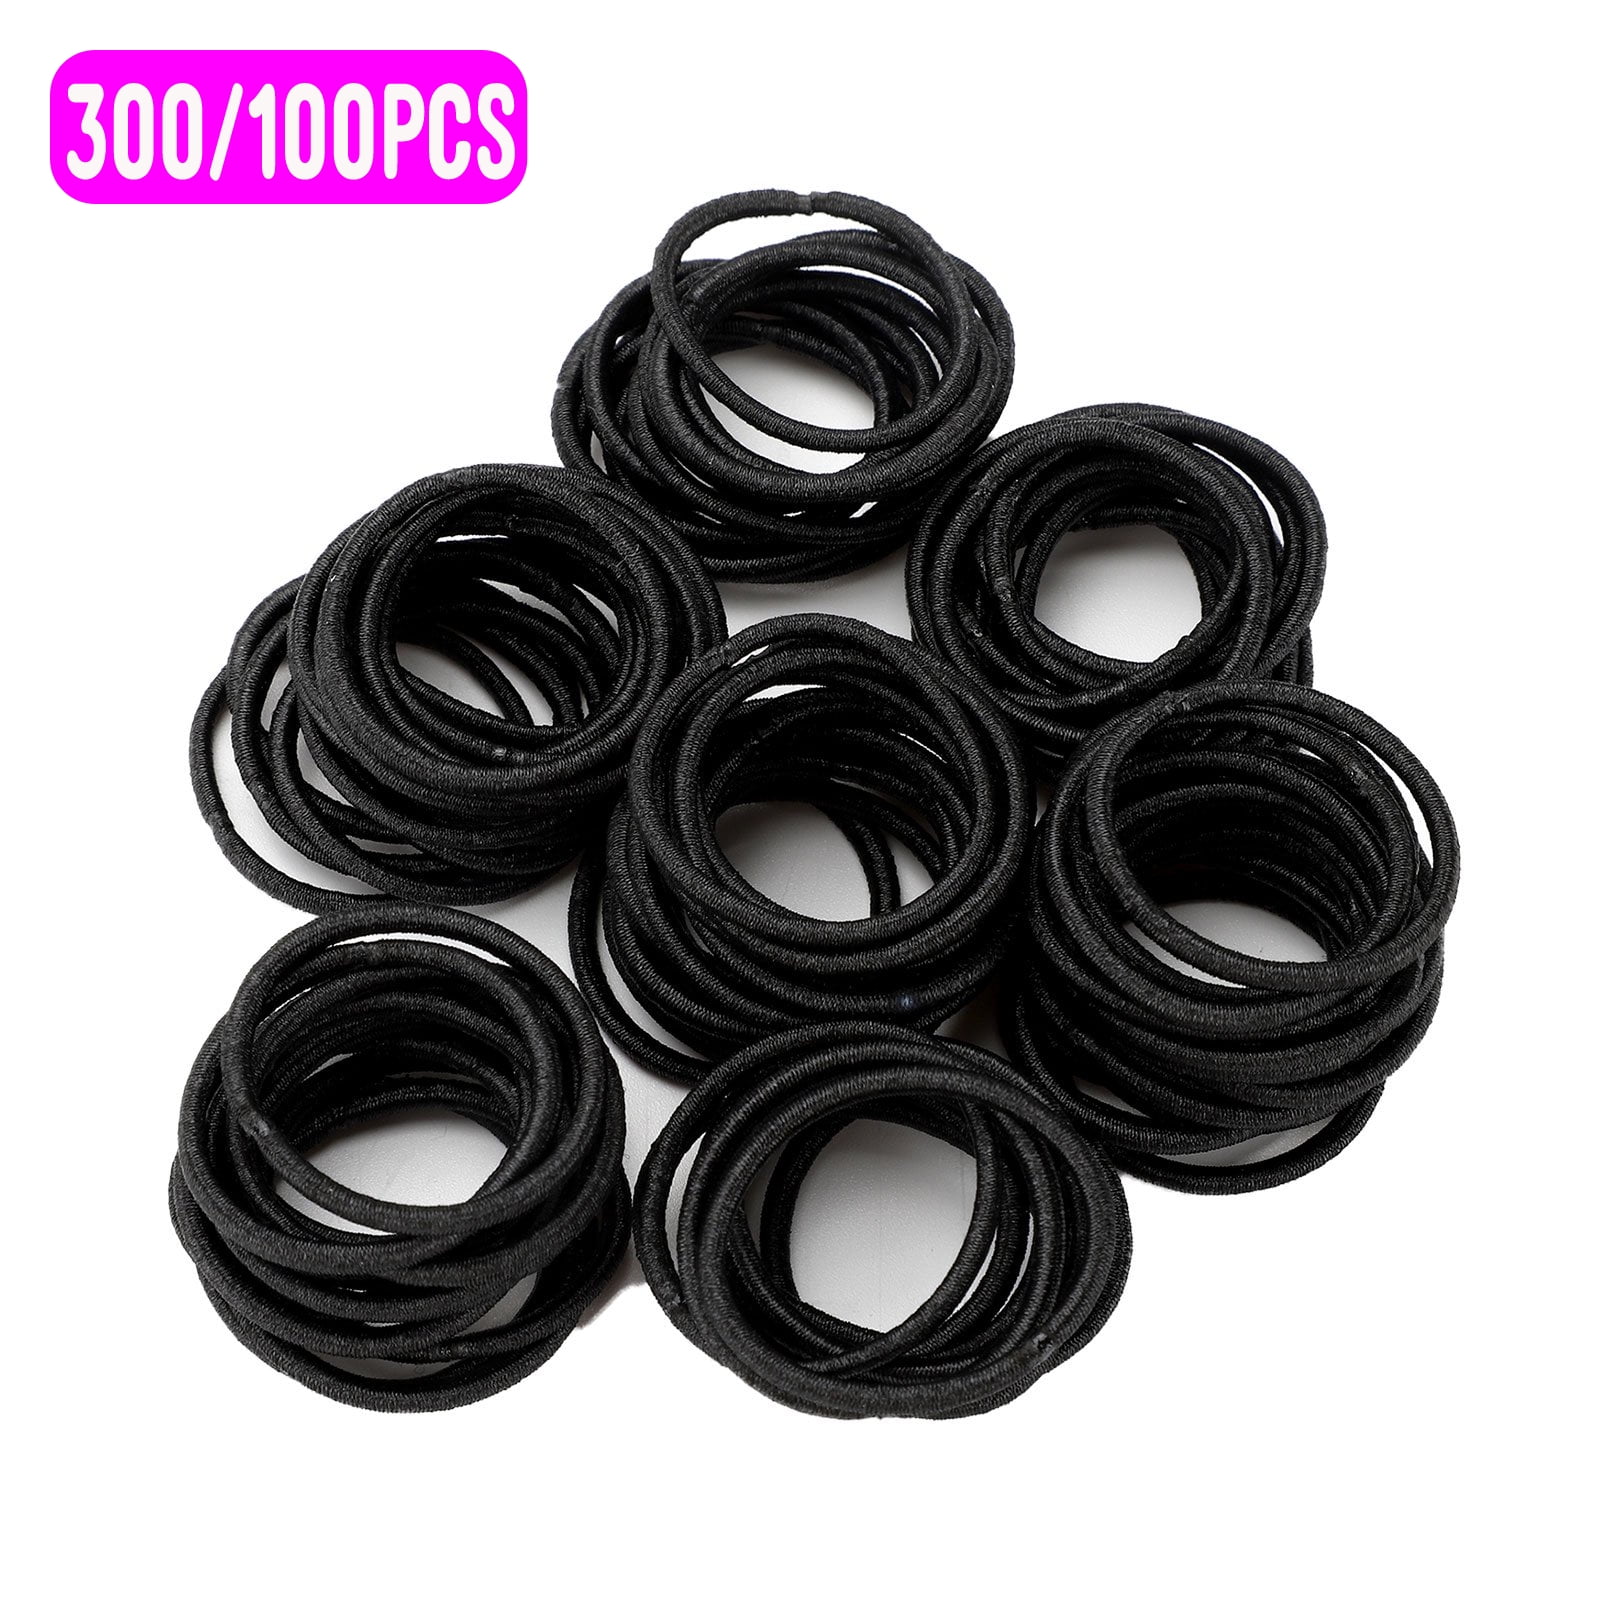 Hair Bands Thick Bobbles 10pcs Elastic Ponytail Rubber Hairbands Black QUALITY 